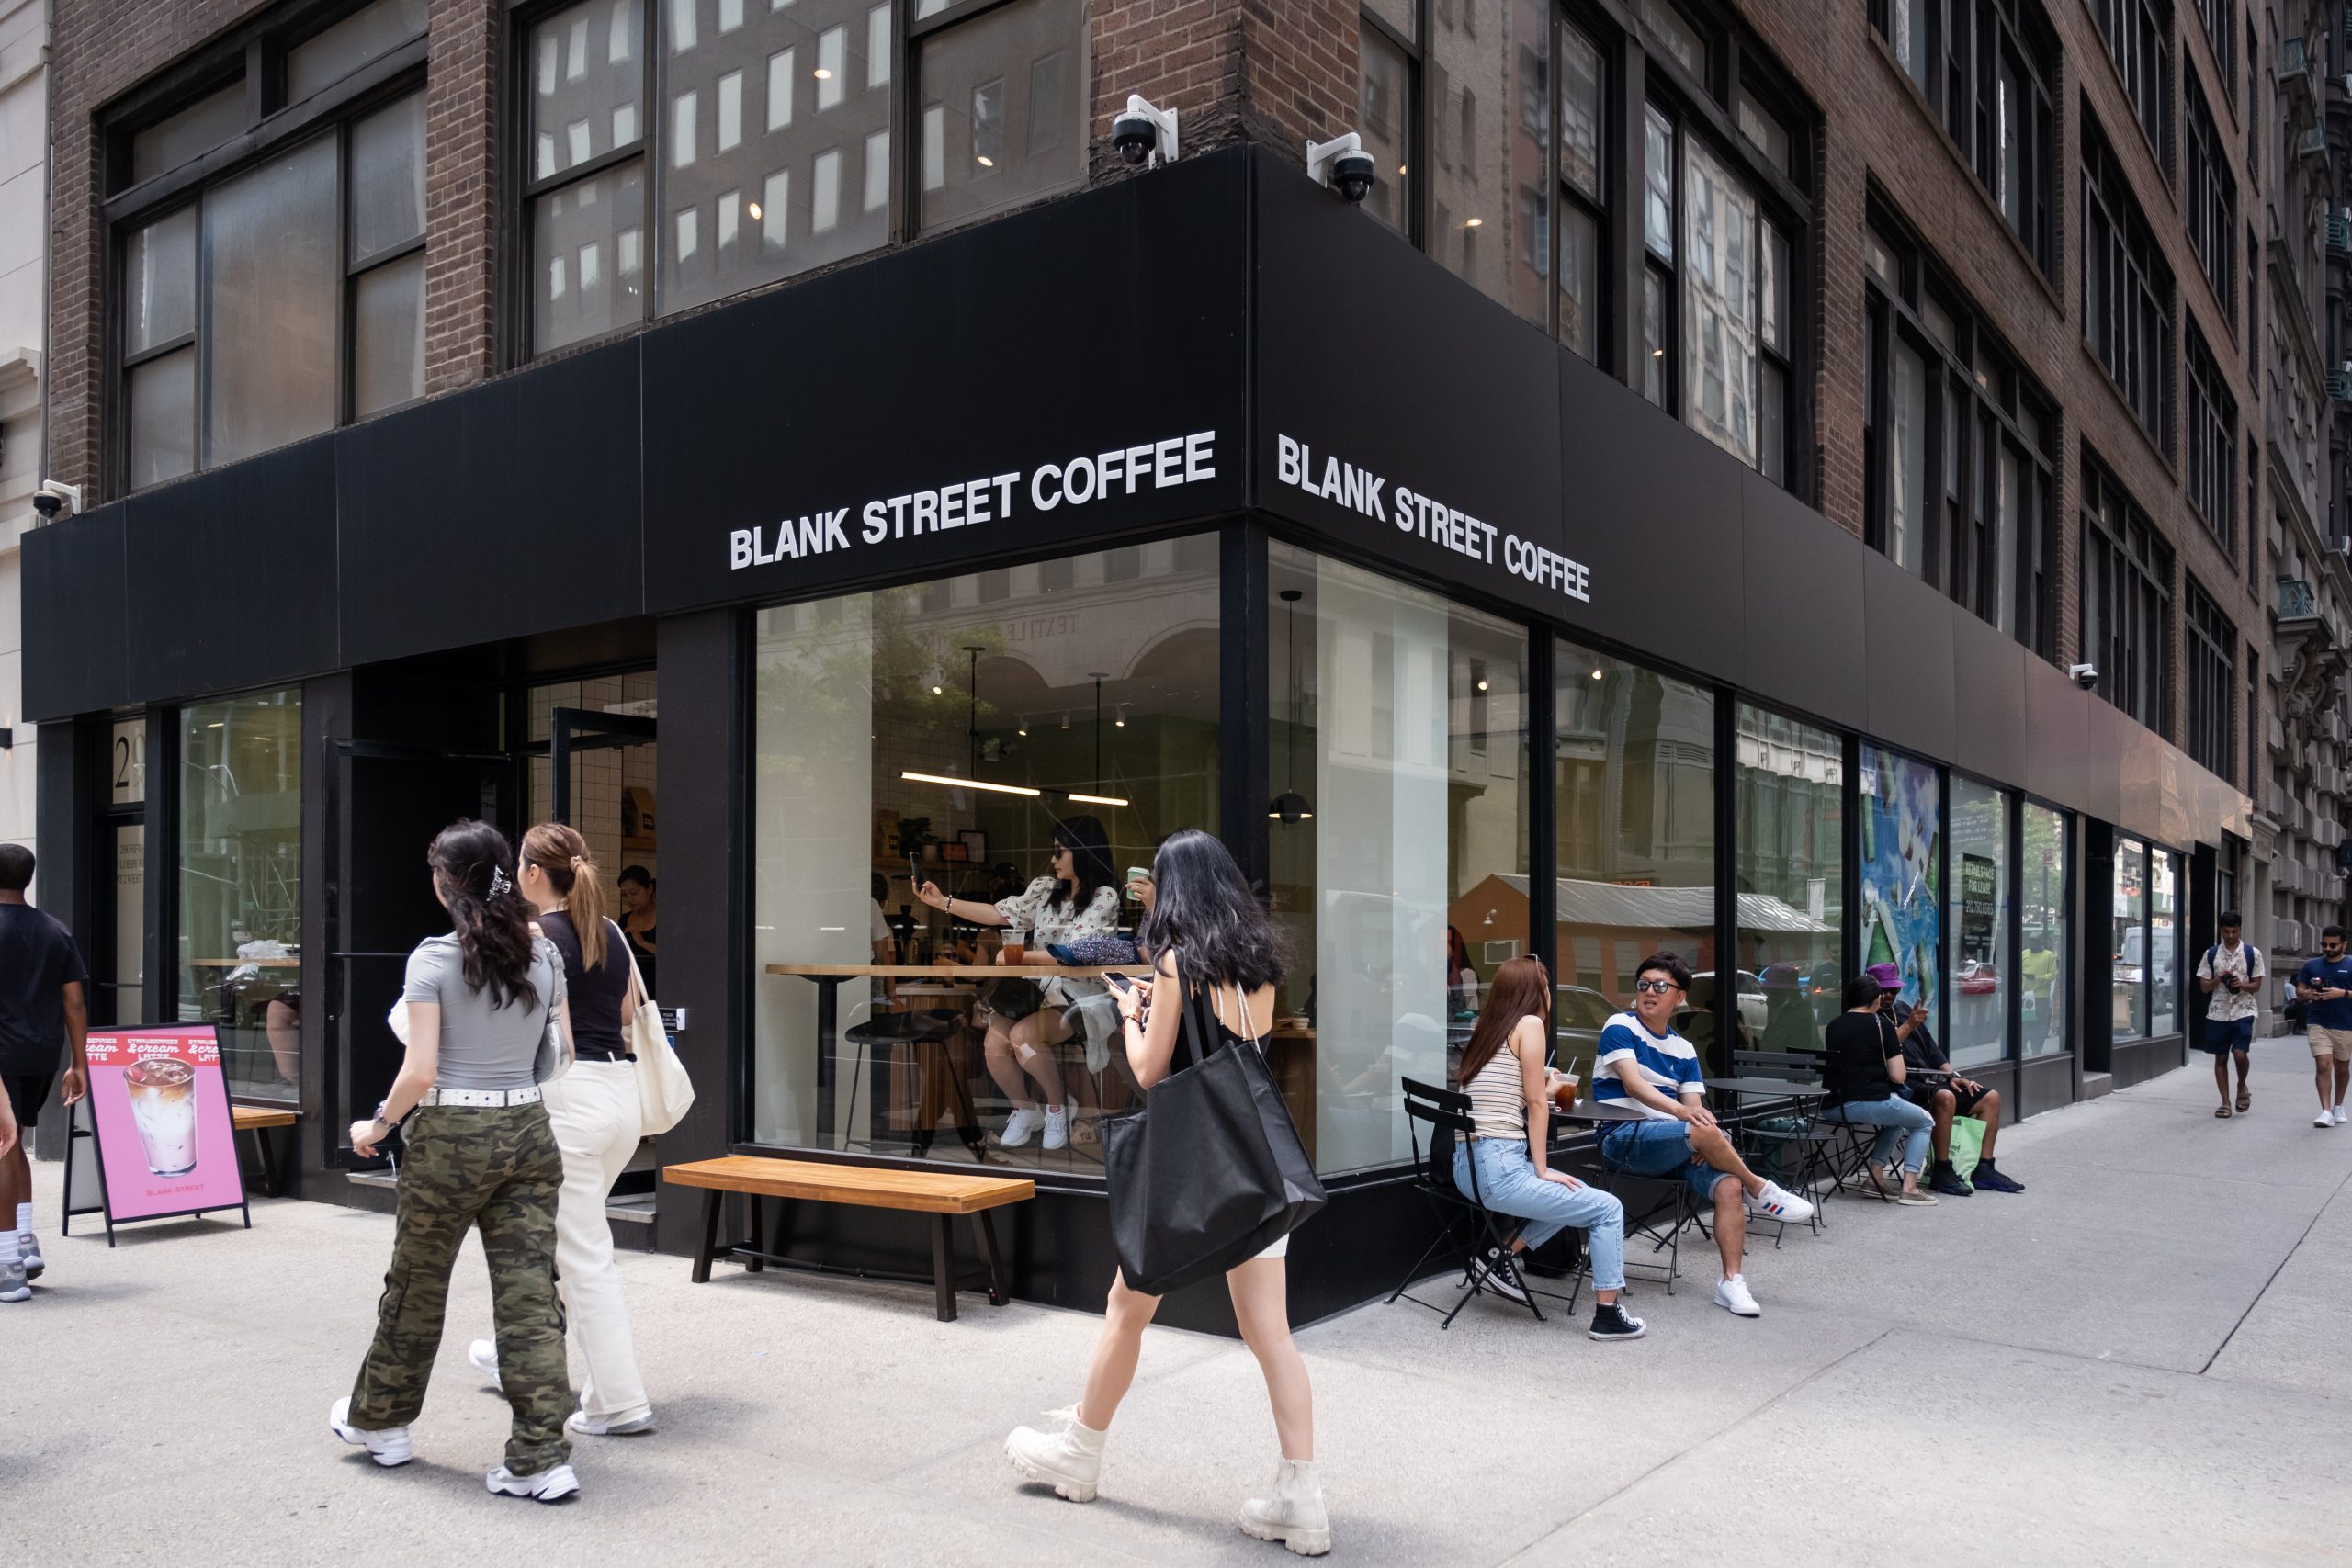 Blank Street Coffee is your product of choice